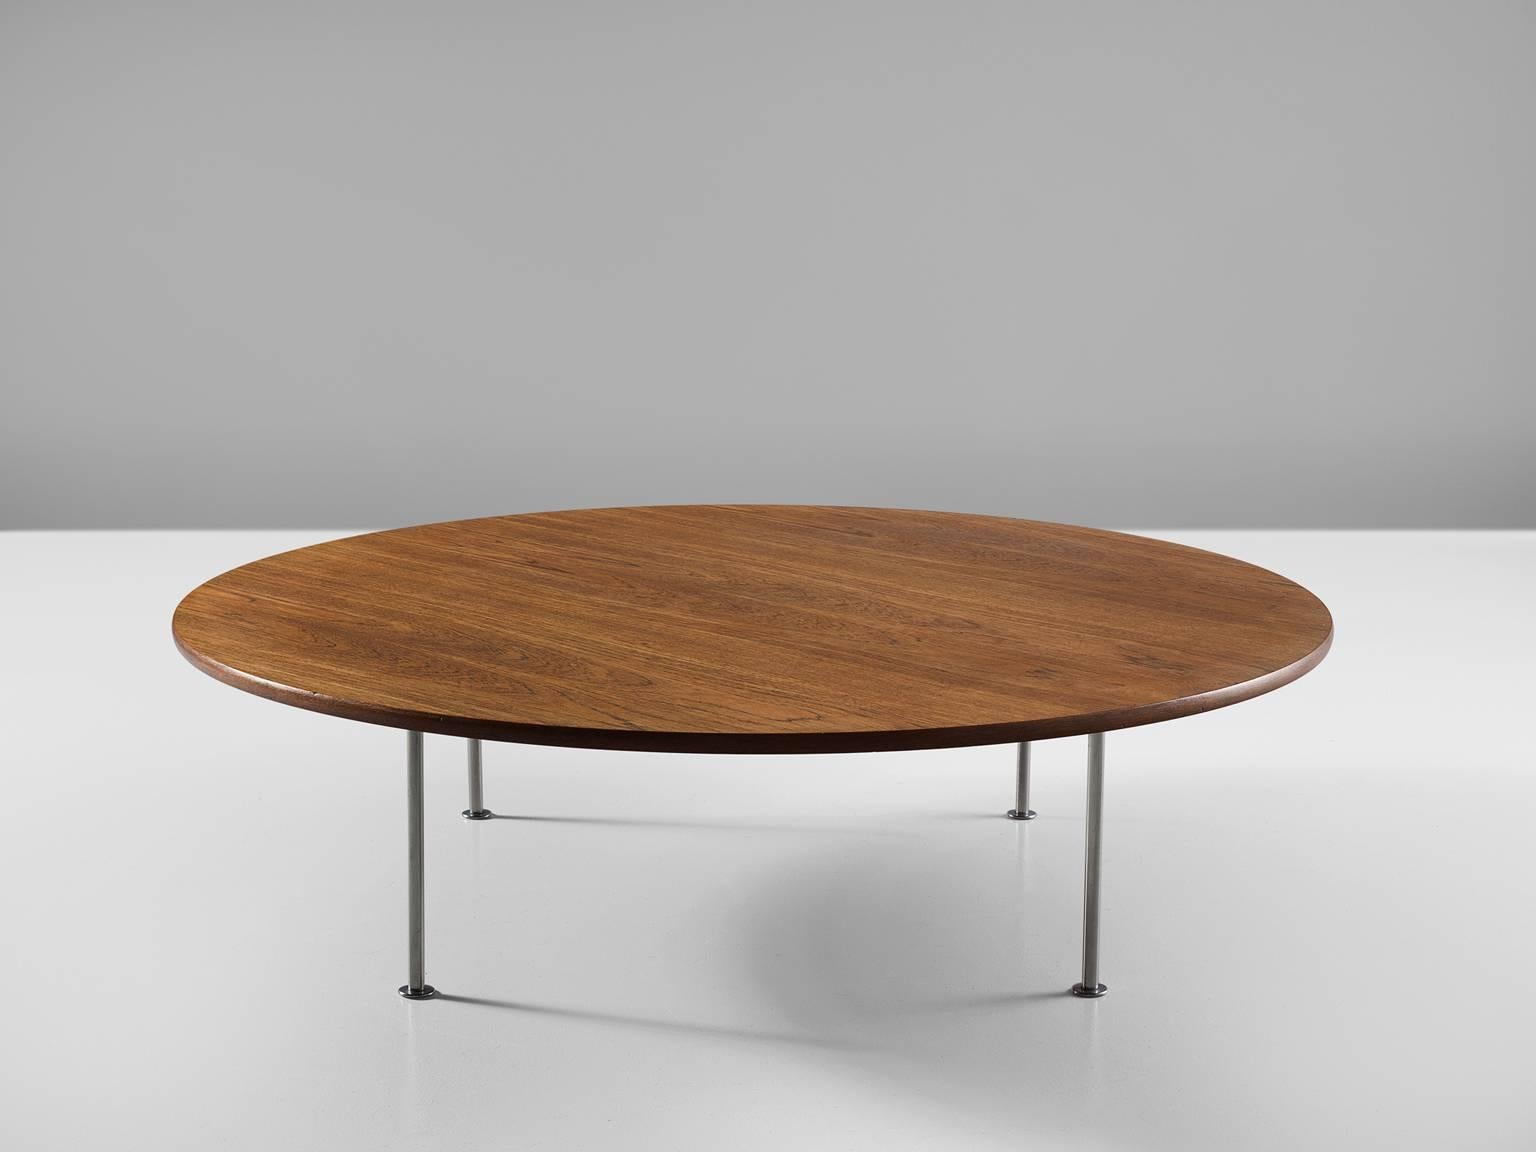 Hans J. Wegner for Andreas Tuck, coffee table, teak and chromed steel, Denmark, 1950s.

This large coffee table with a teak circular top is a true example of Wegner's simple but majestic designs. The proportions of this modest (but large) coffee